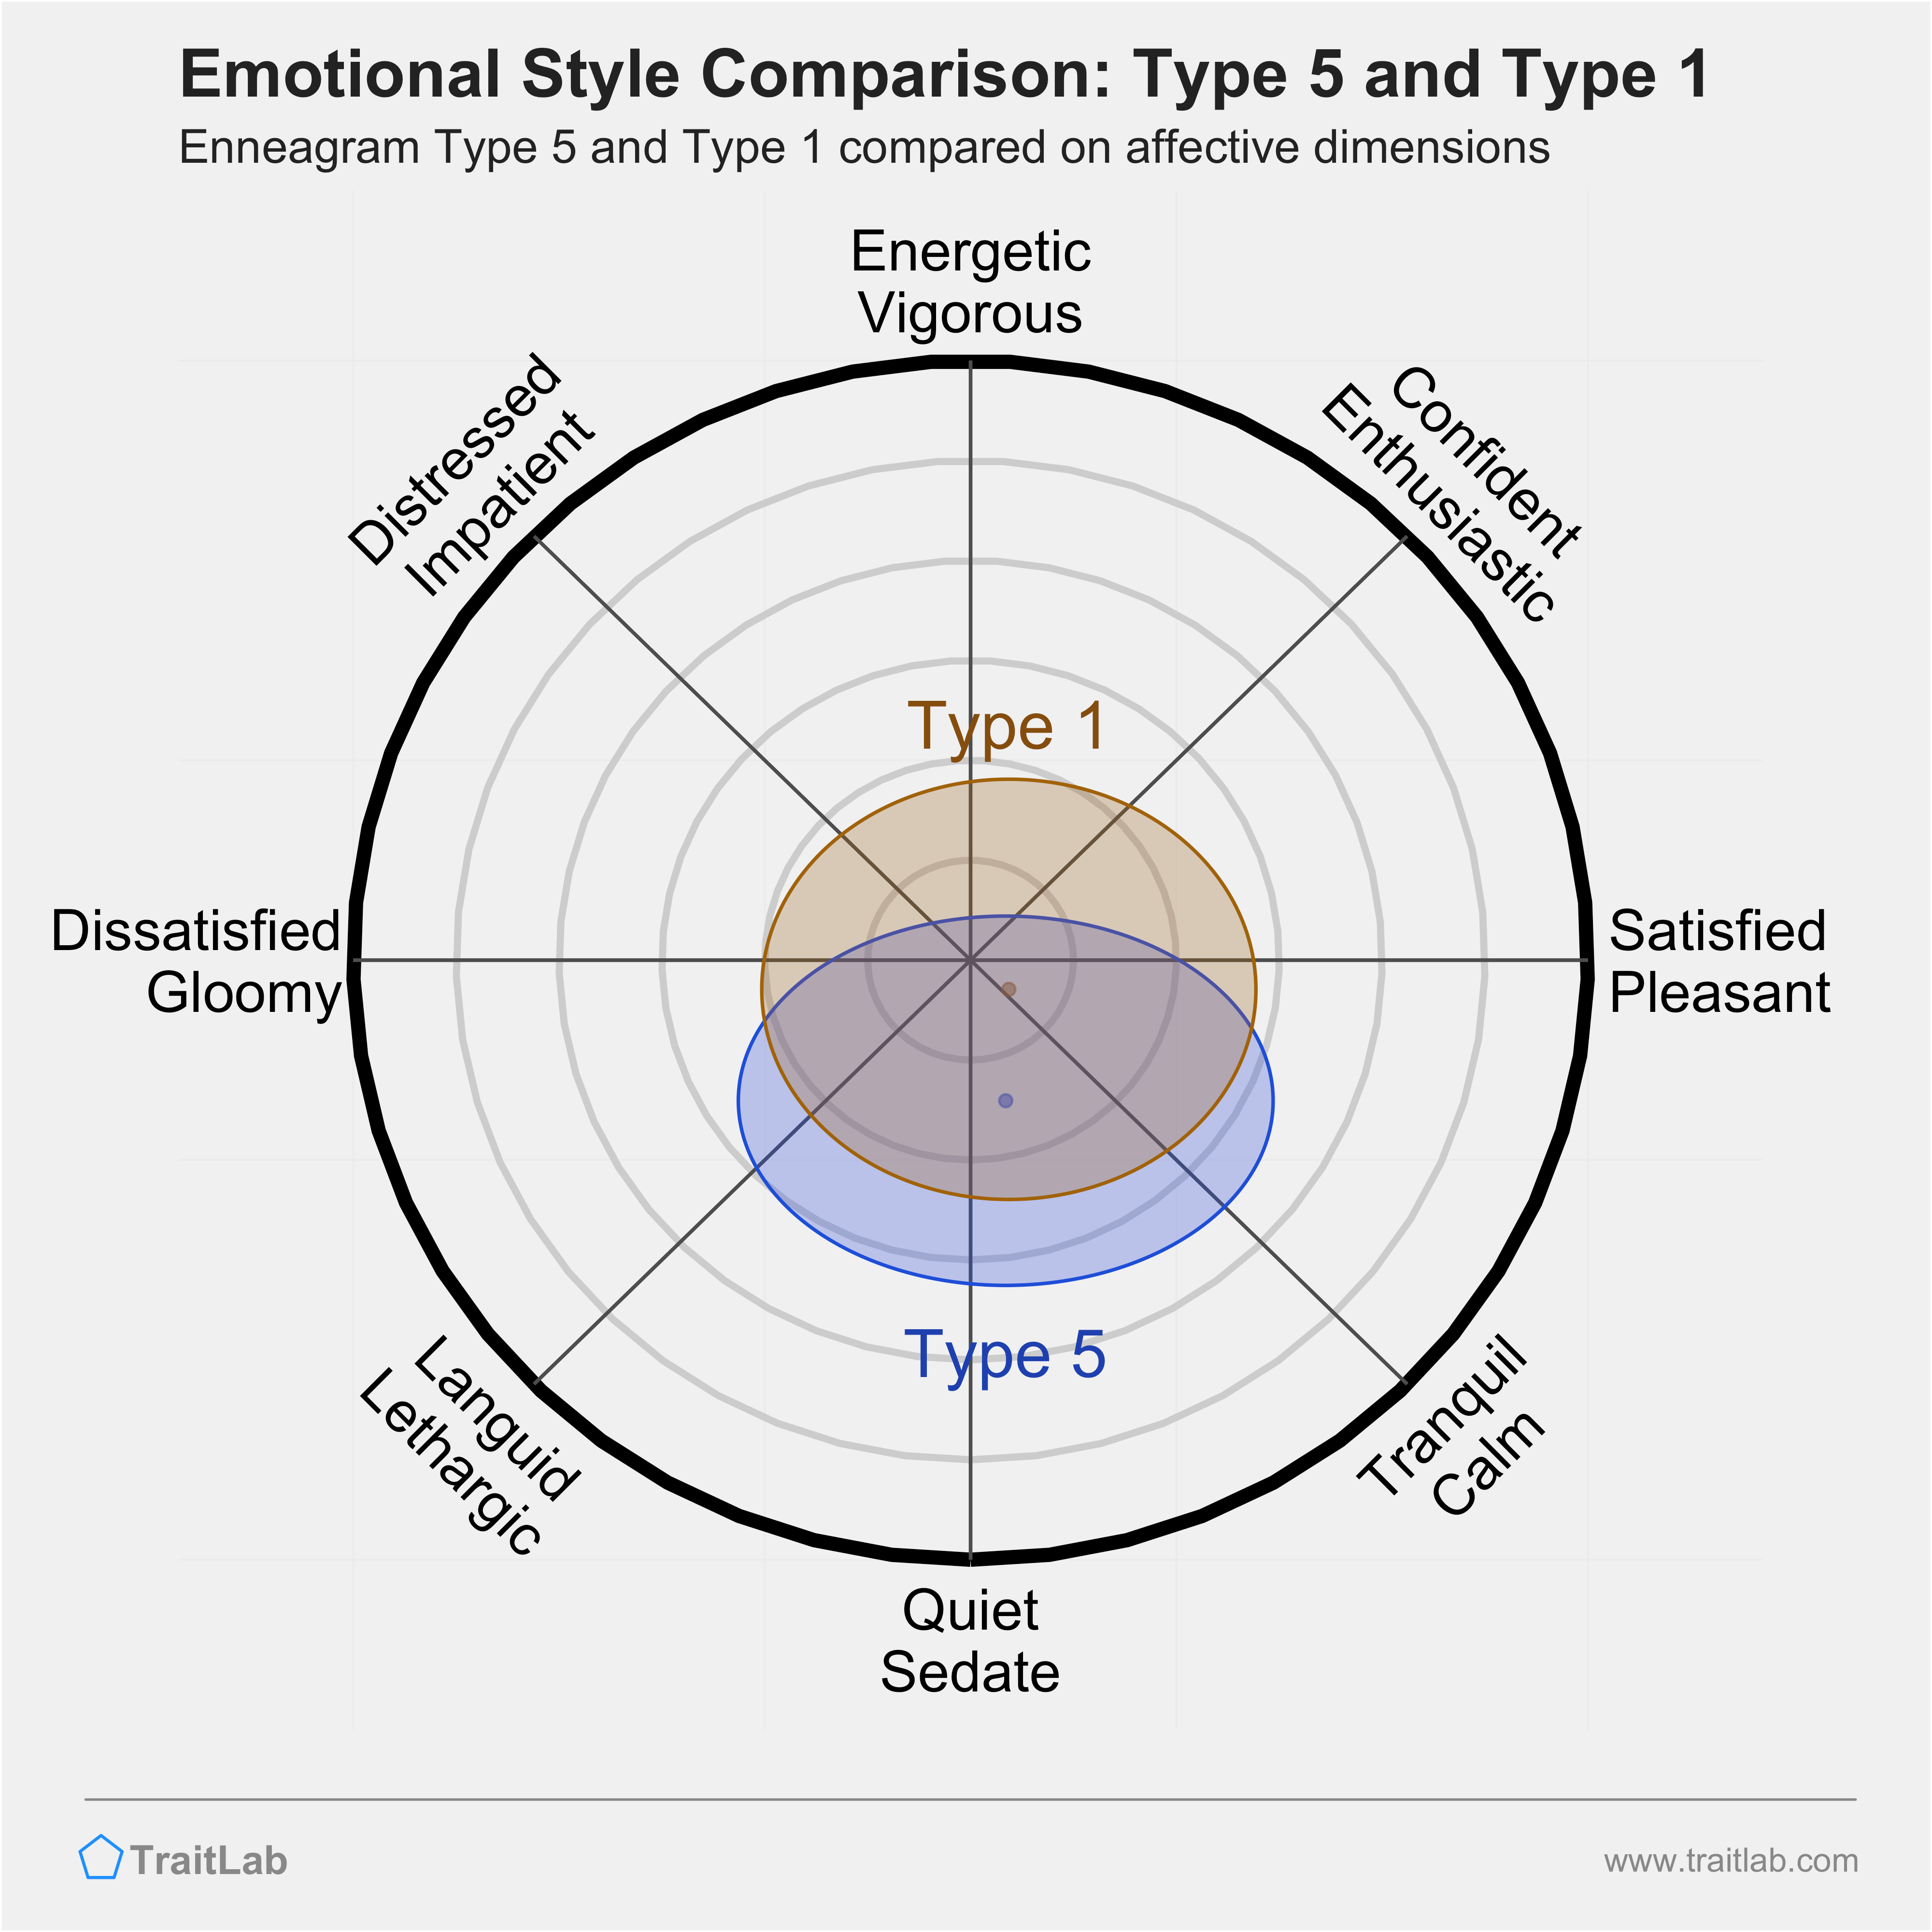 Type 5 and Type 1 comparison across emotional (affective) dimensions